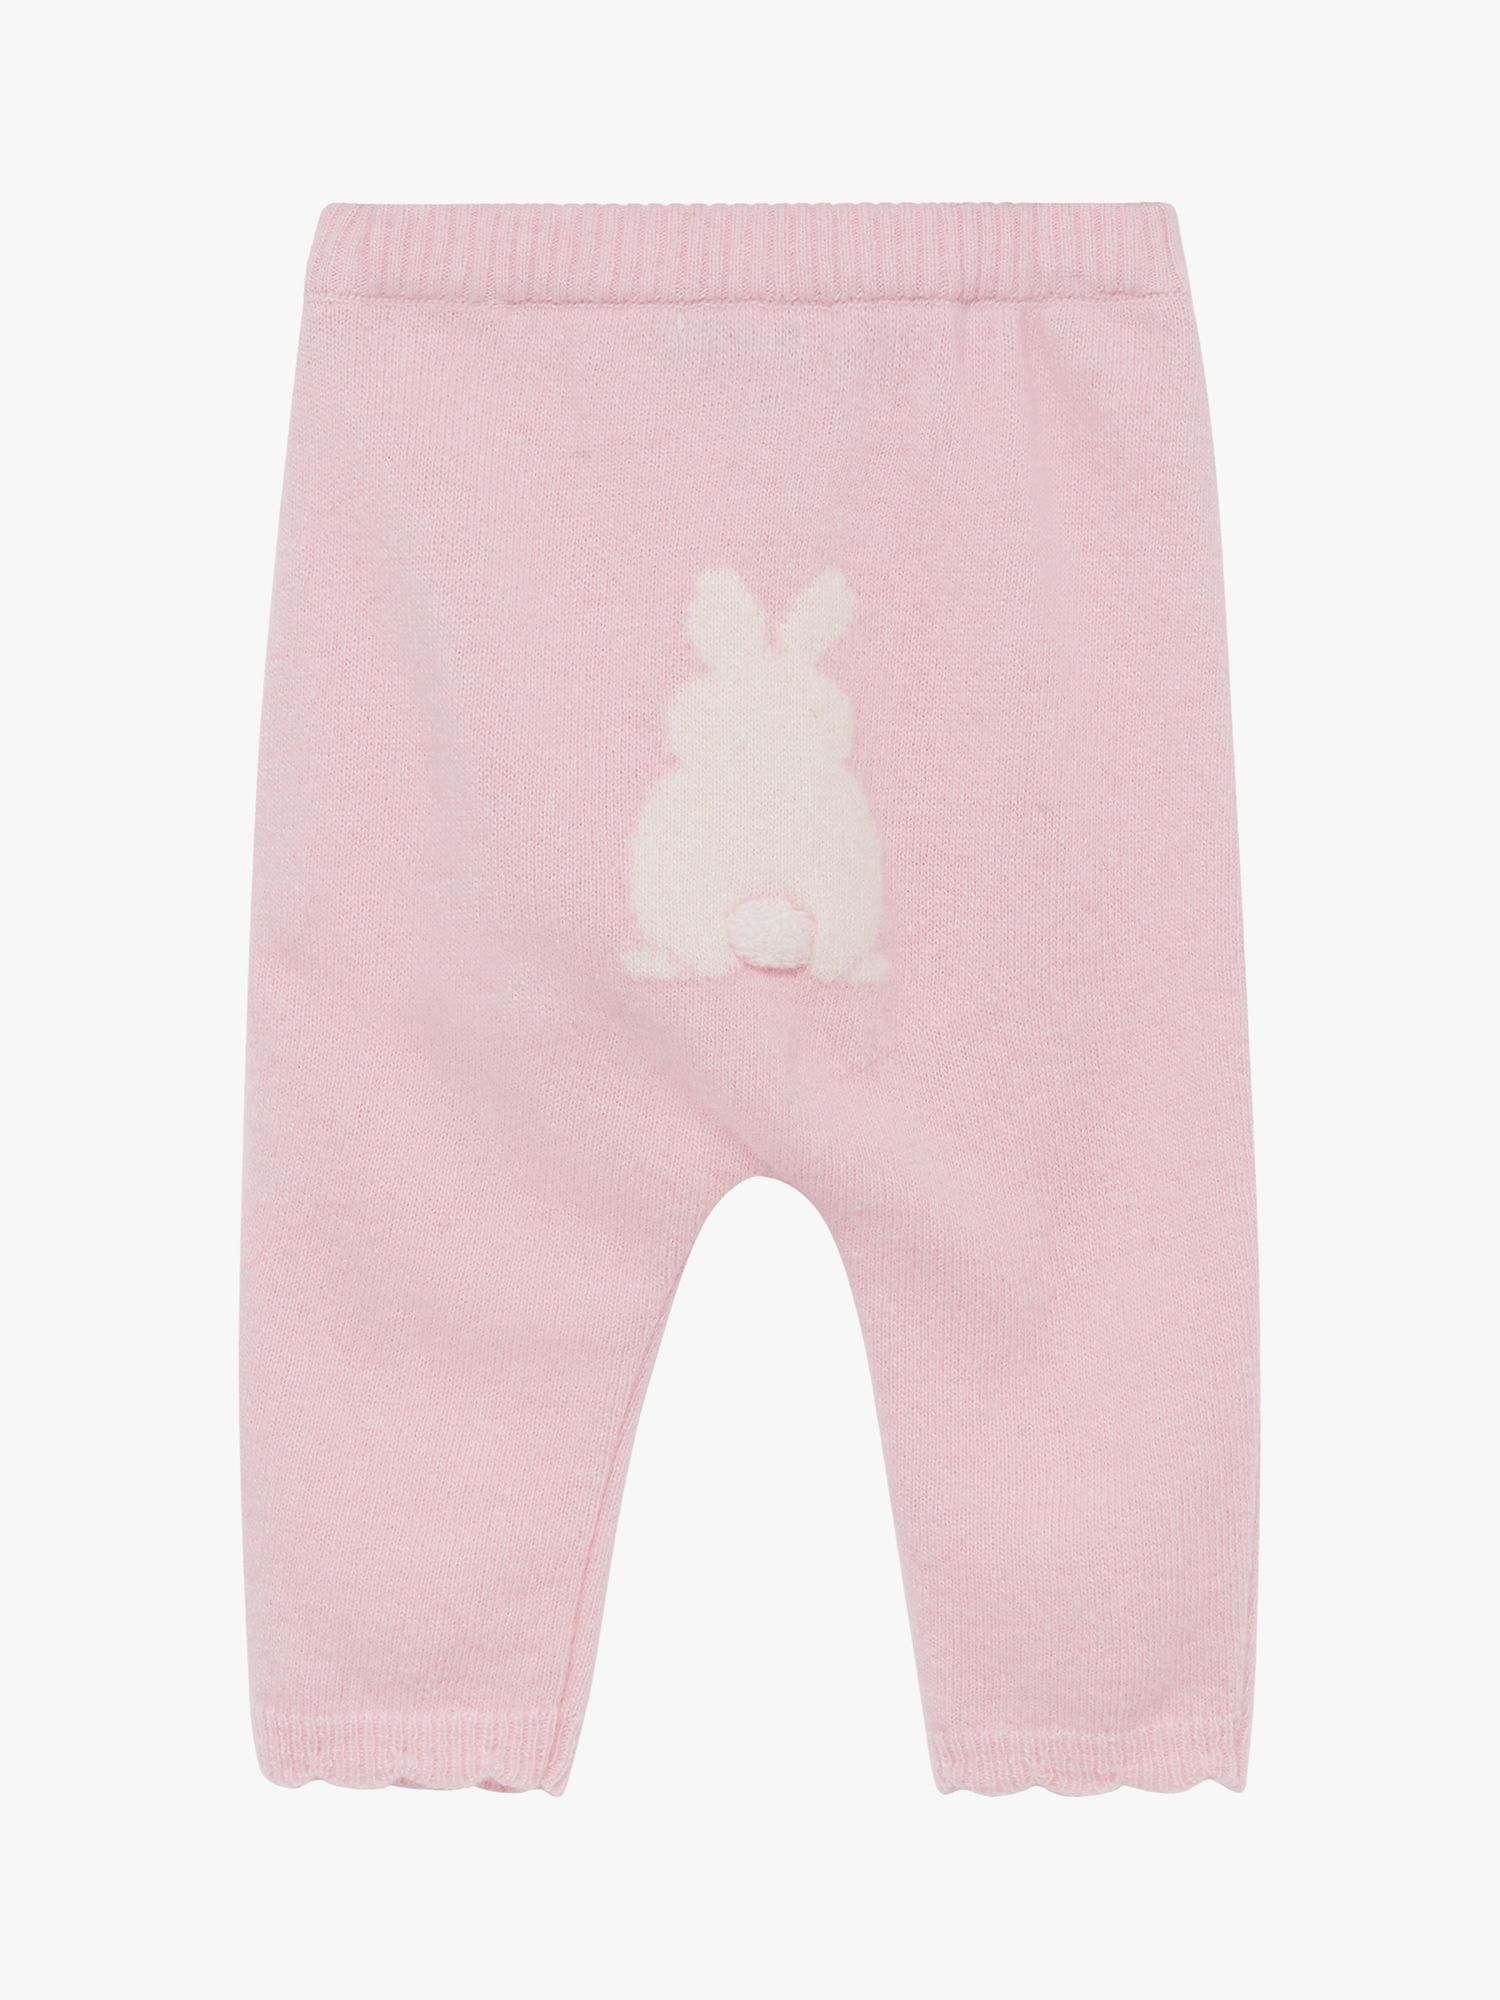 Trotters Baby Isabelle Bunny Cashmere Blend Leggings, Pale Pink